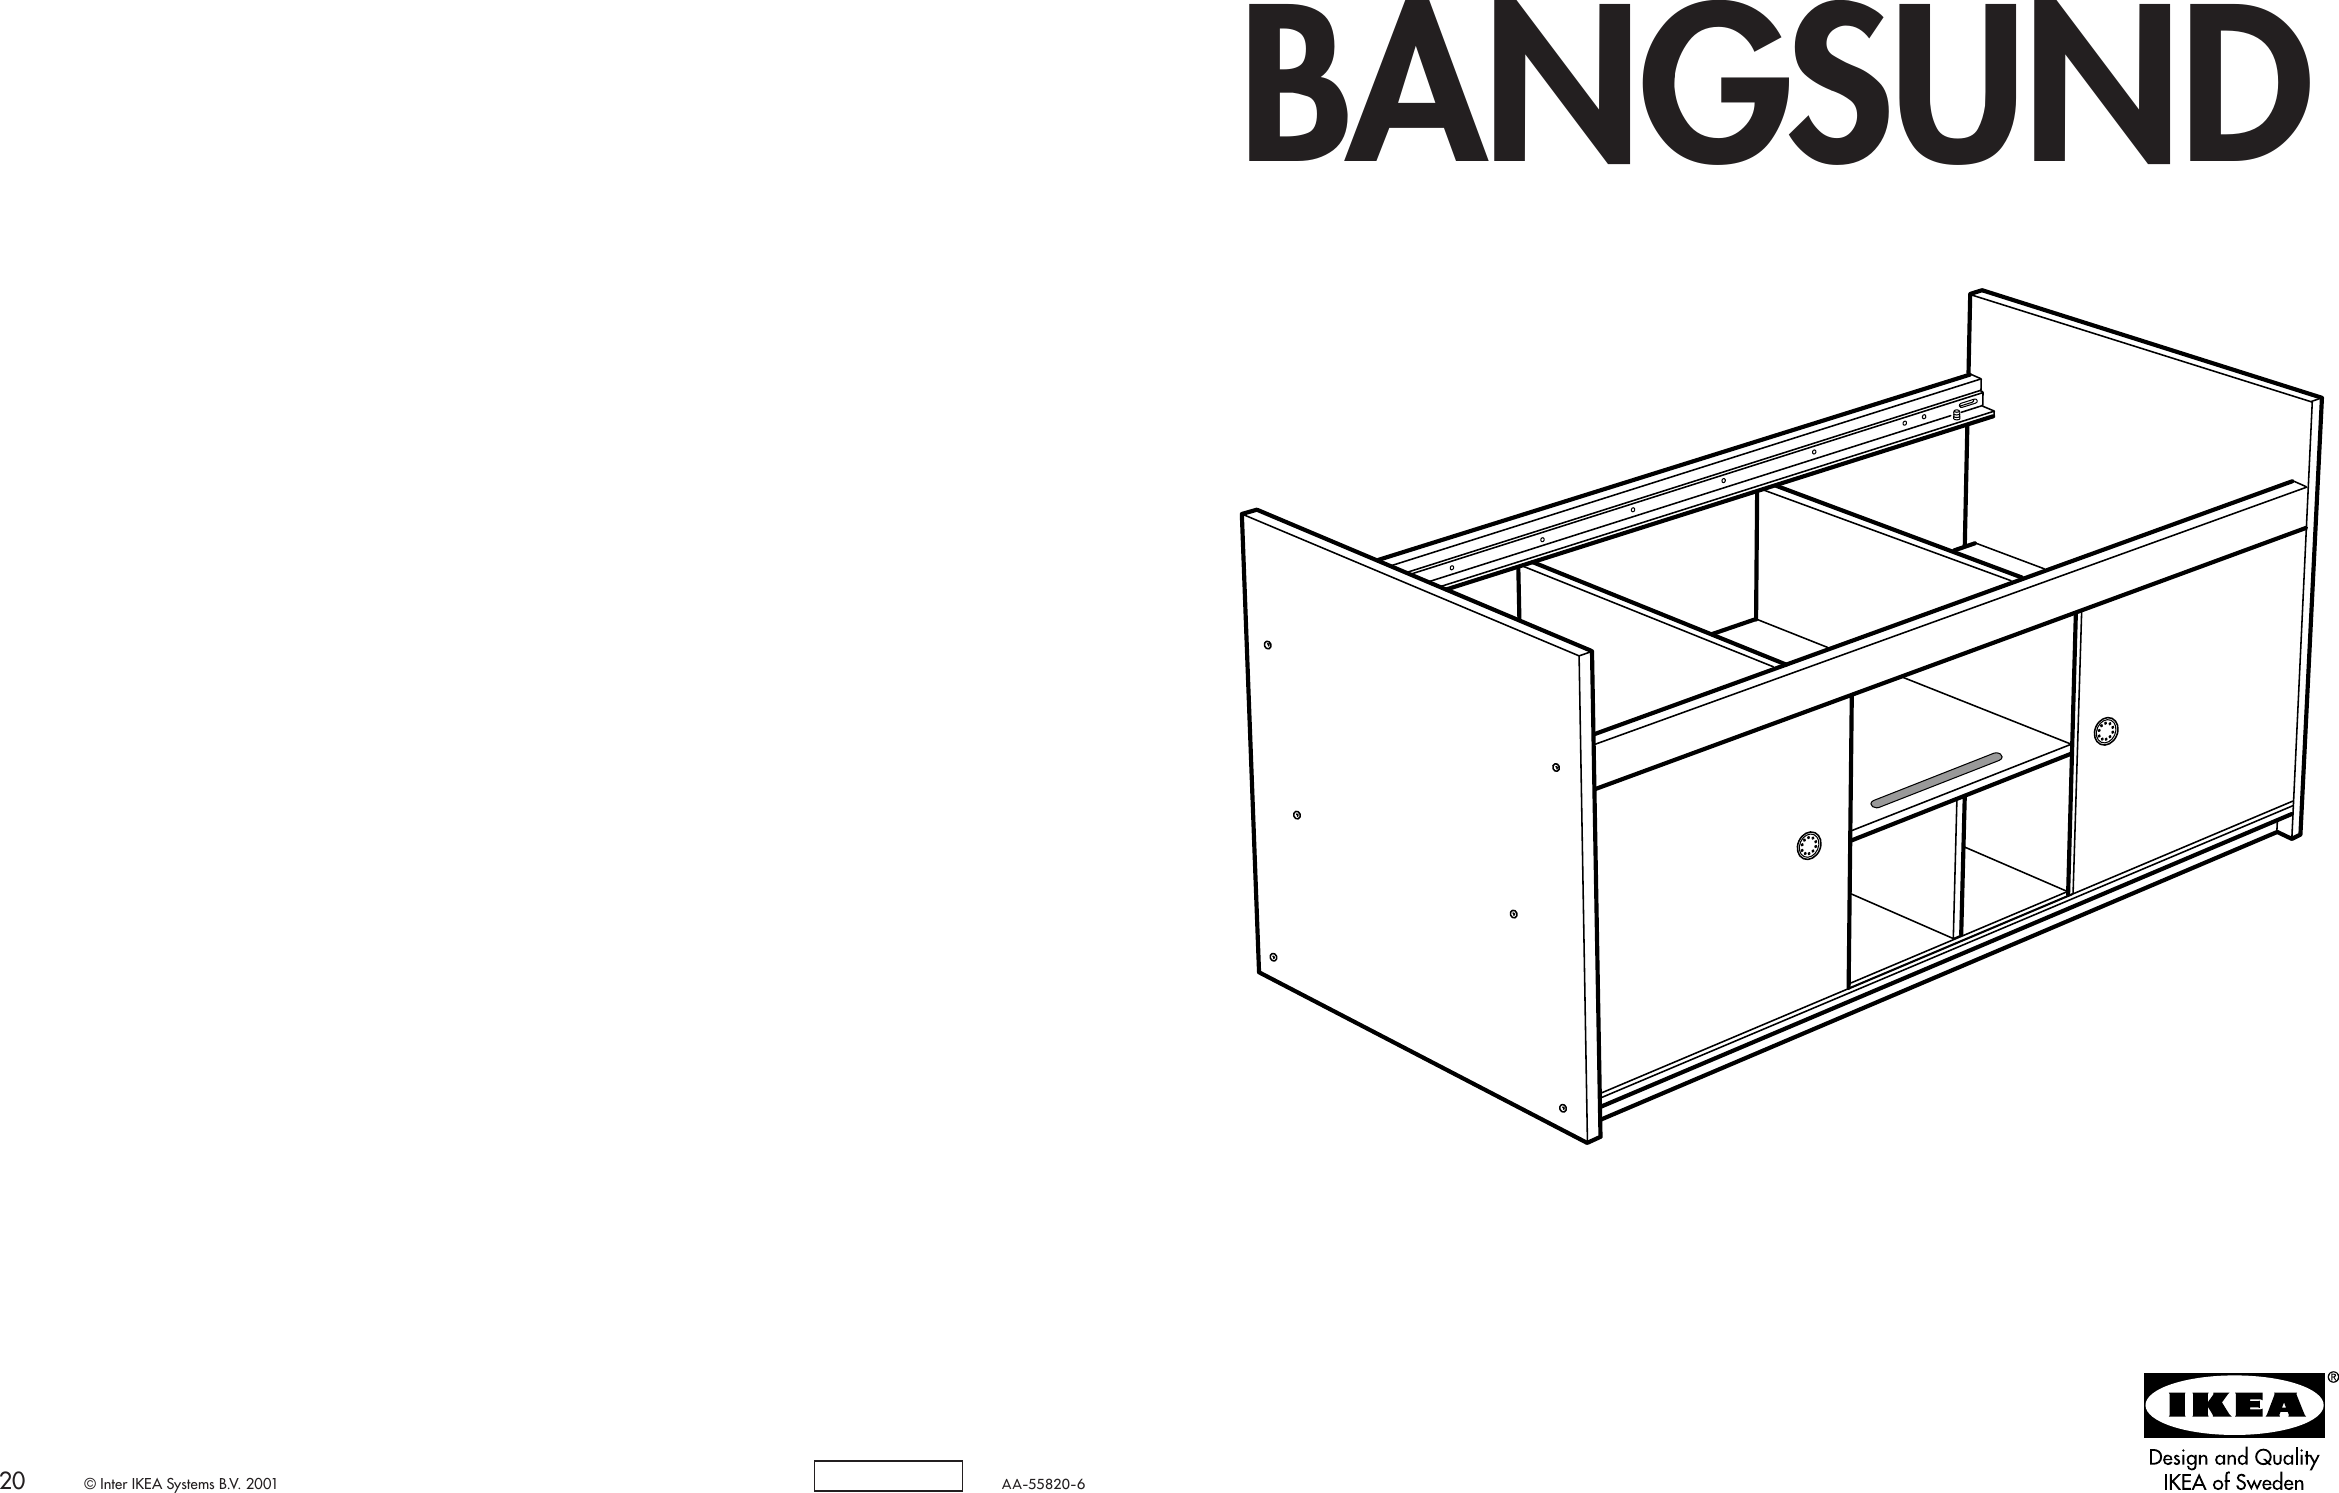 Ikea Bangsund Bed Twin Assembly, Ikea Twin Bed Instructions